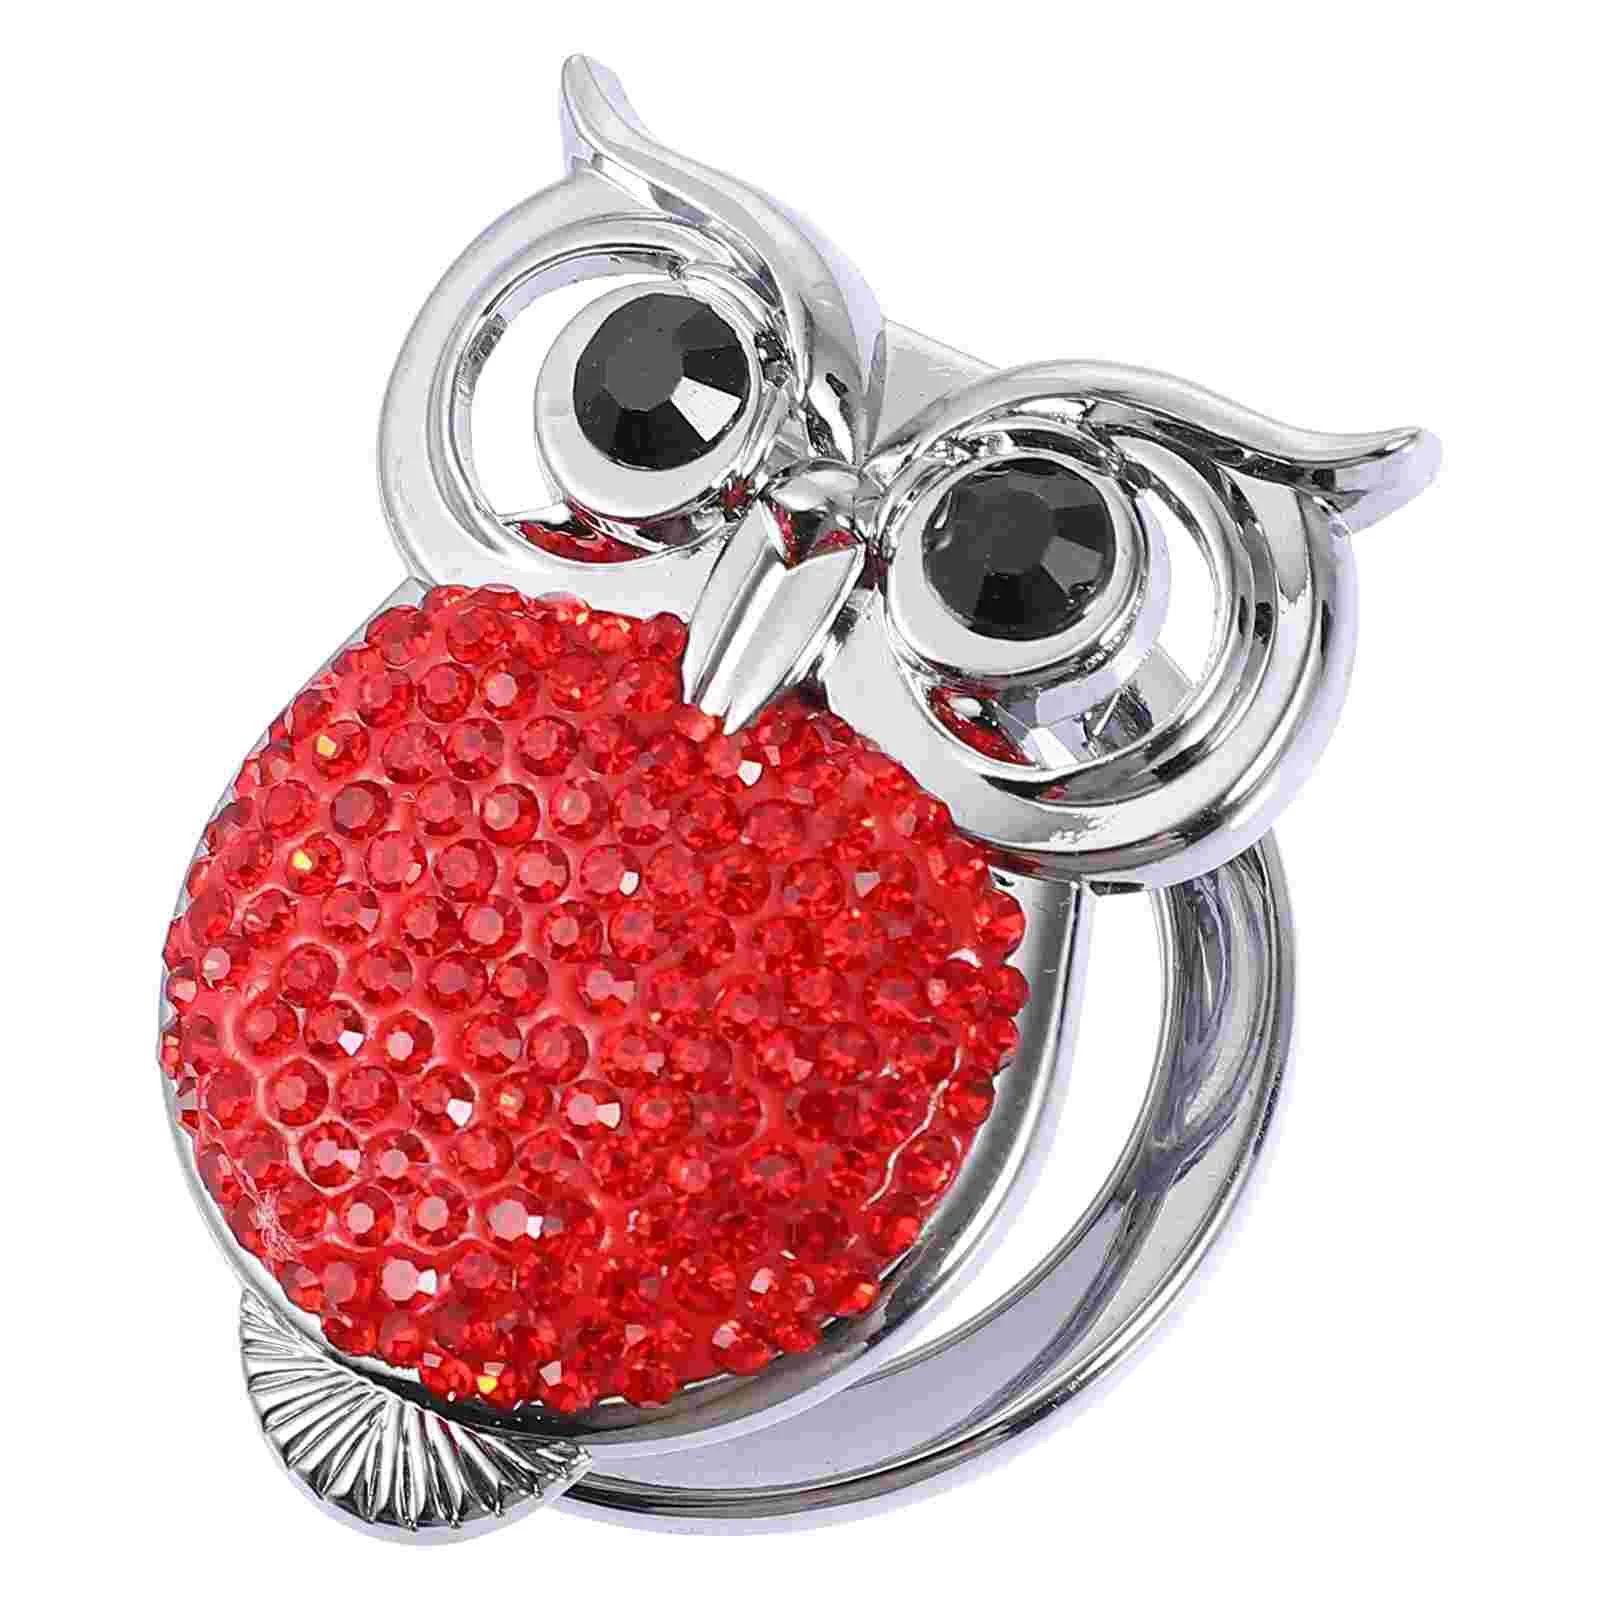 

Accessories For Automotive Switch Cover Ignition 5X3.5cm Auto Protective Red Rhinestones Owl Push Start Button Engine Stop Decor